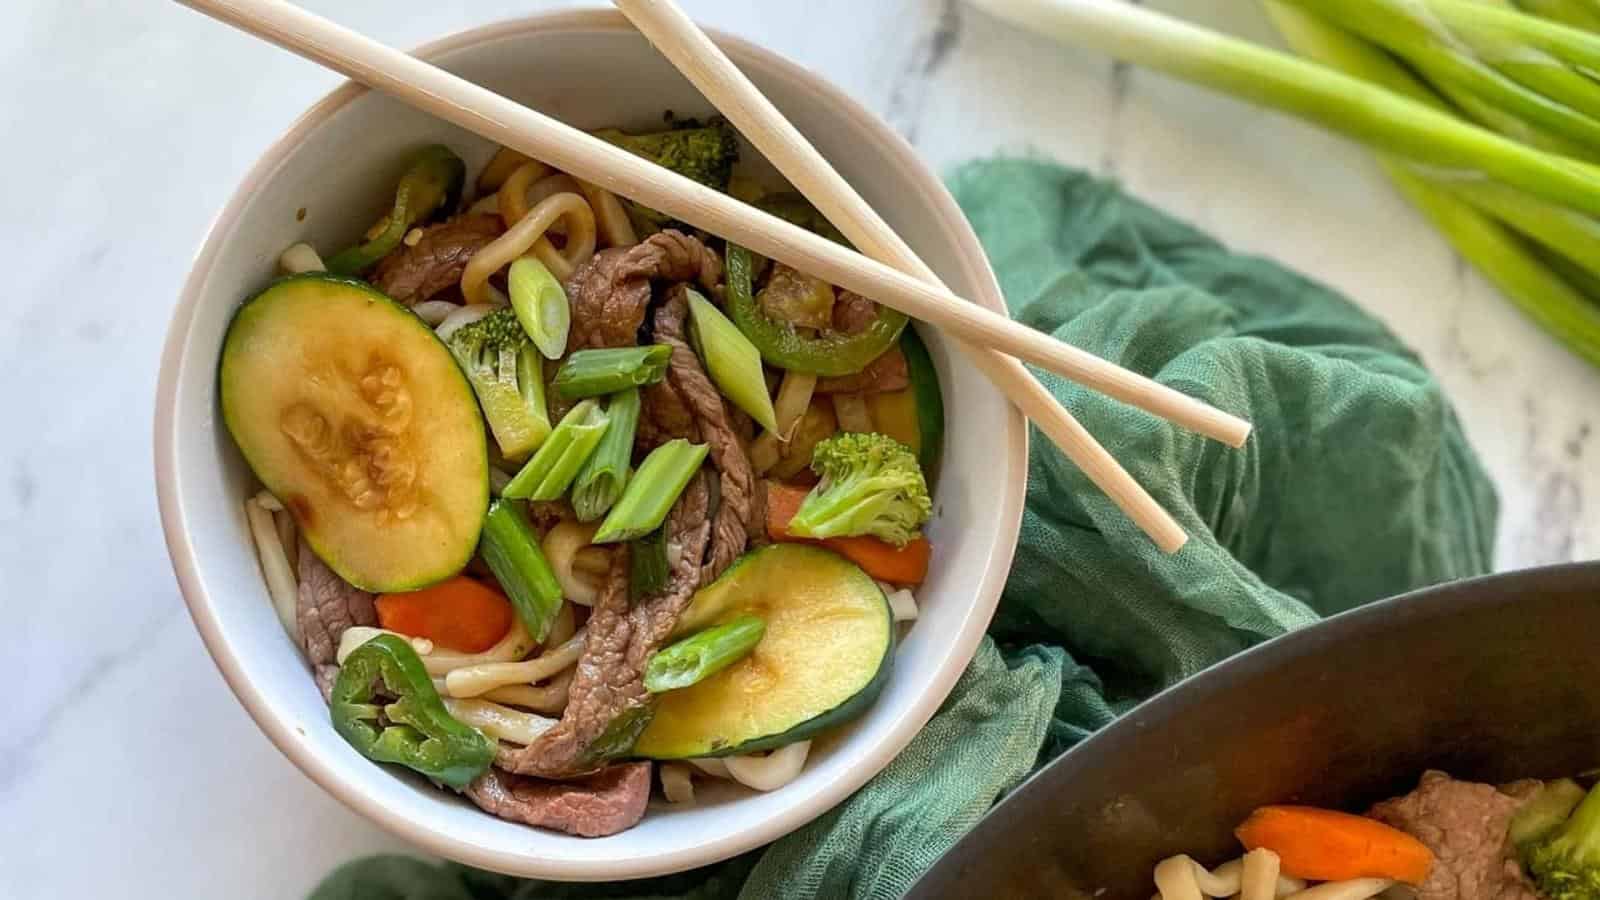 Beef yaki udon in a white bowl with chopsticks.